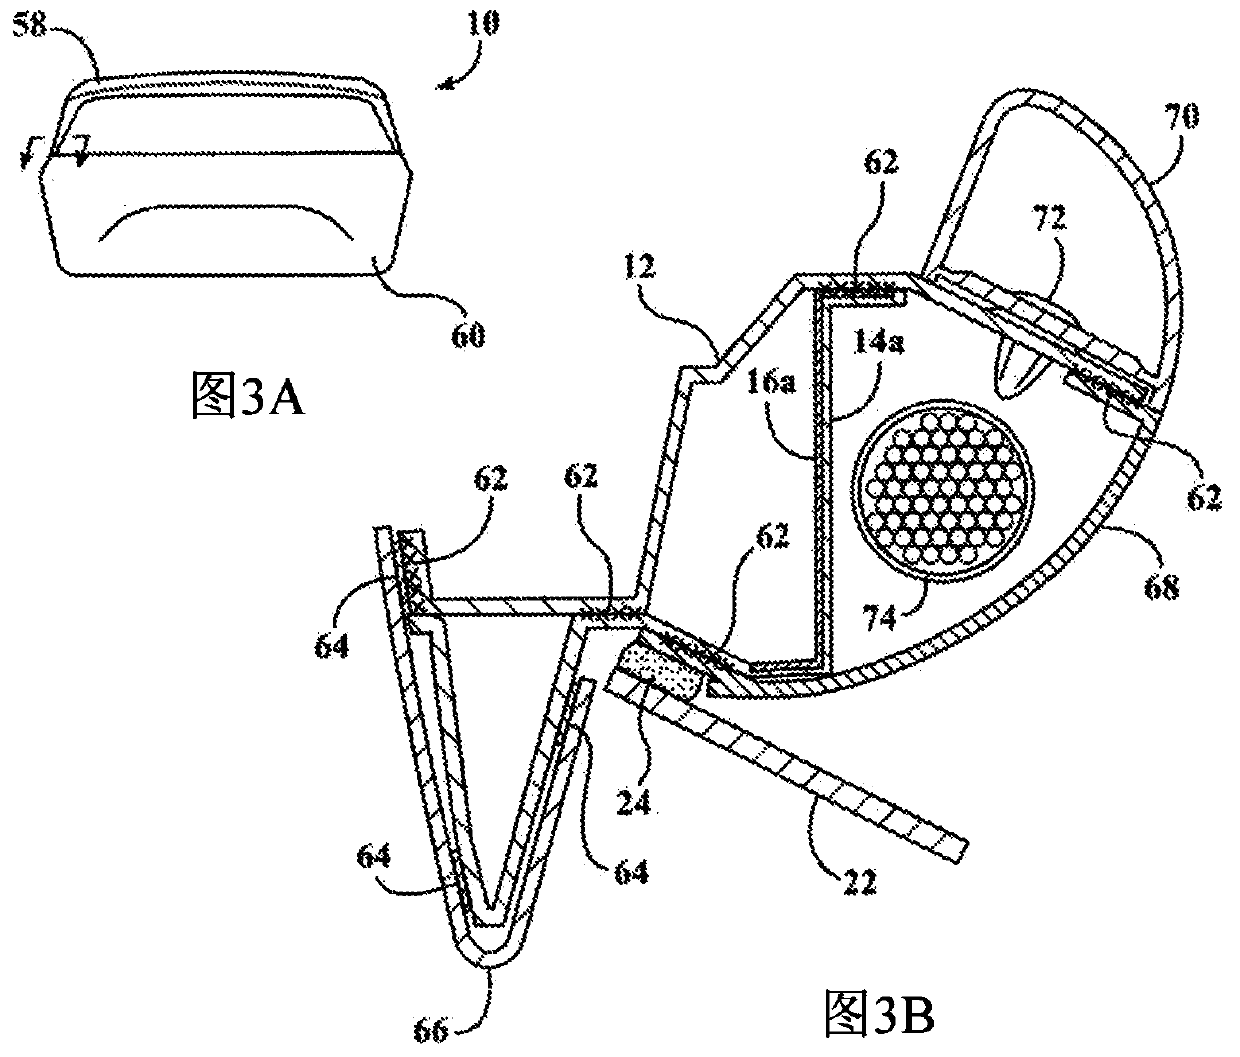 Infrared welded liftgate assembly and process of making same